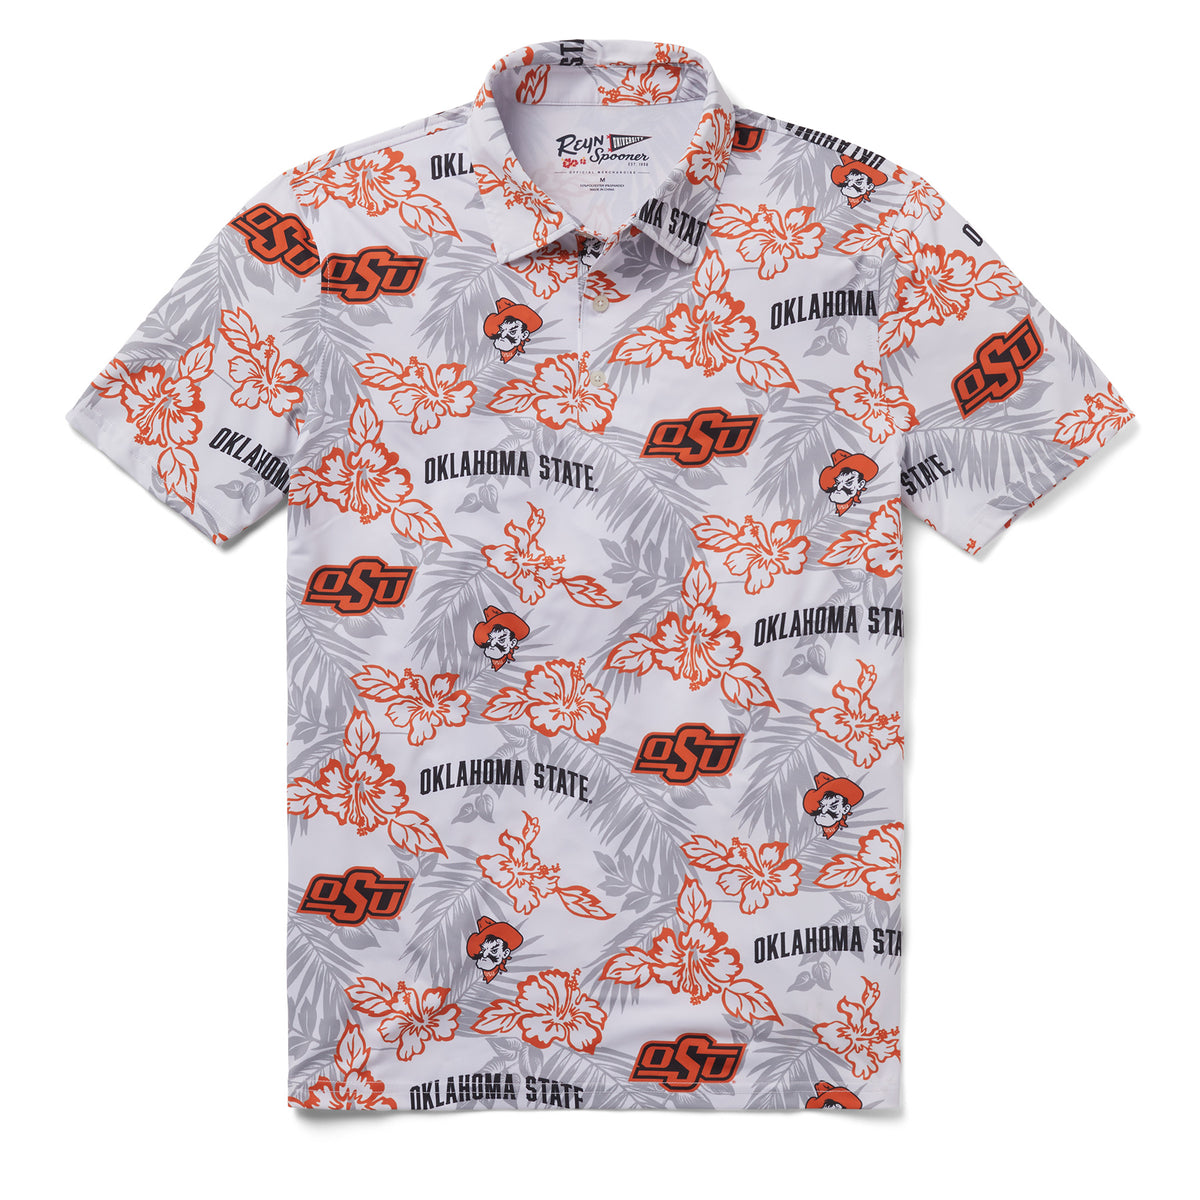 Reyn Spooner - Baseball is back! Rep your team with in style with our MLB aloha  shirts. We've added new styles for all 30 teams, check them out on our  site.